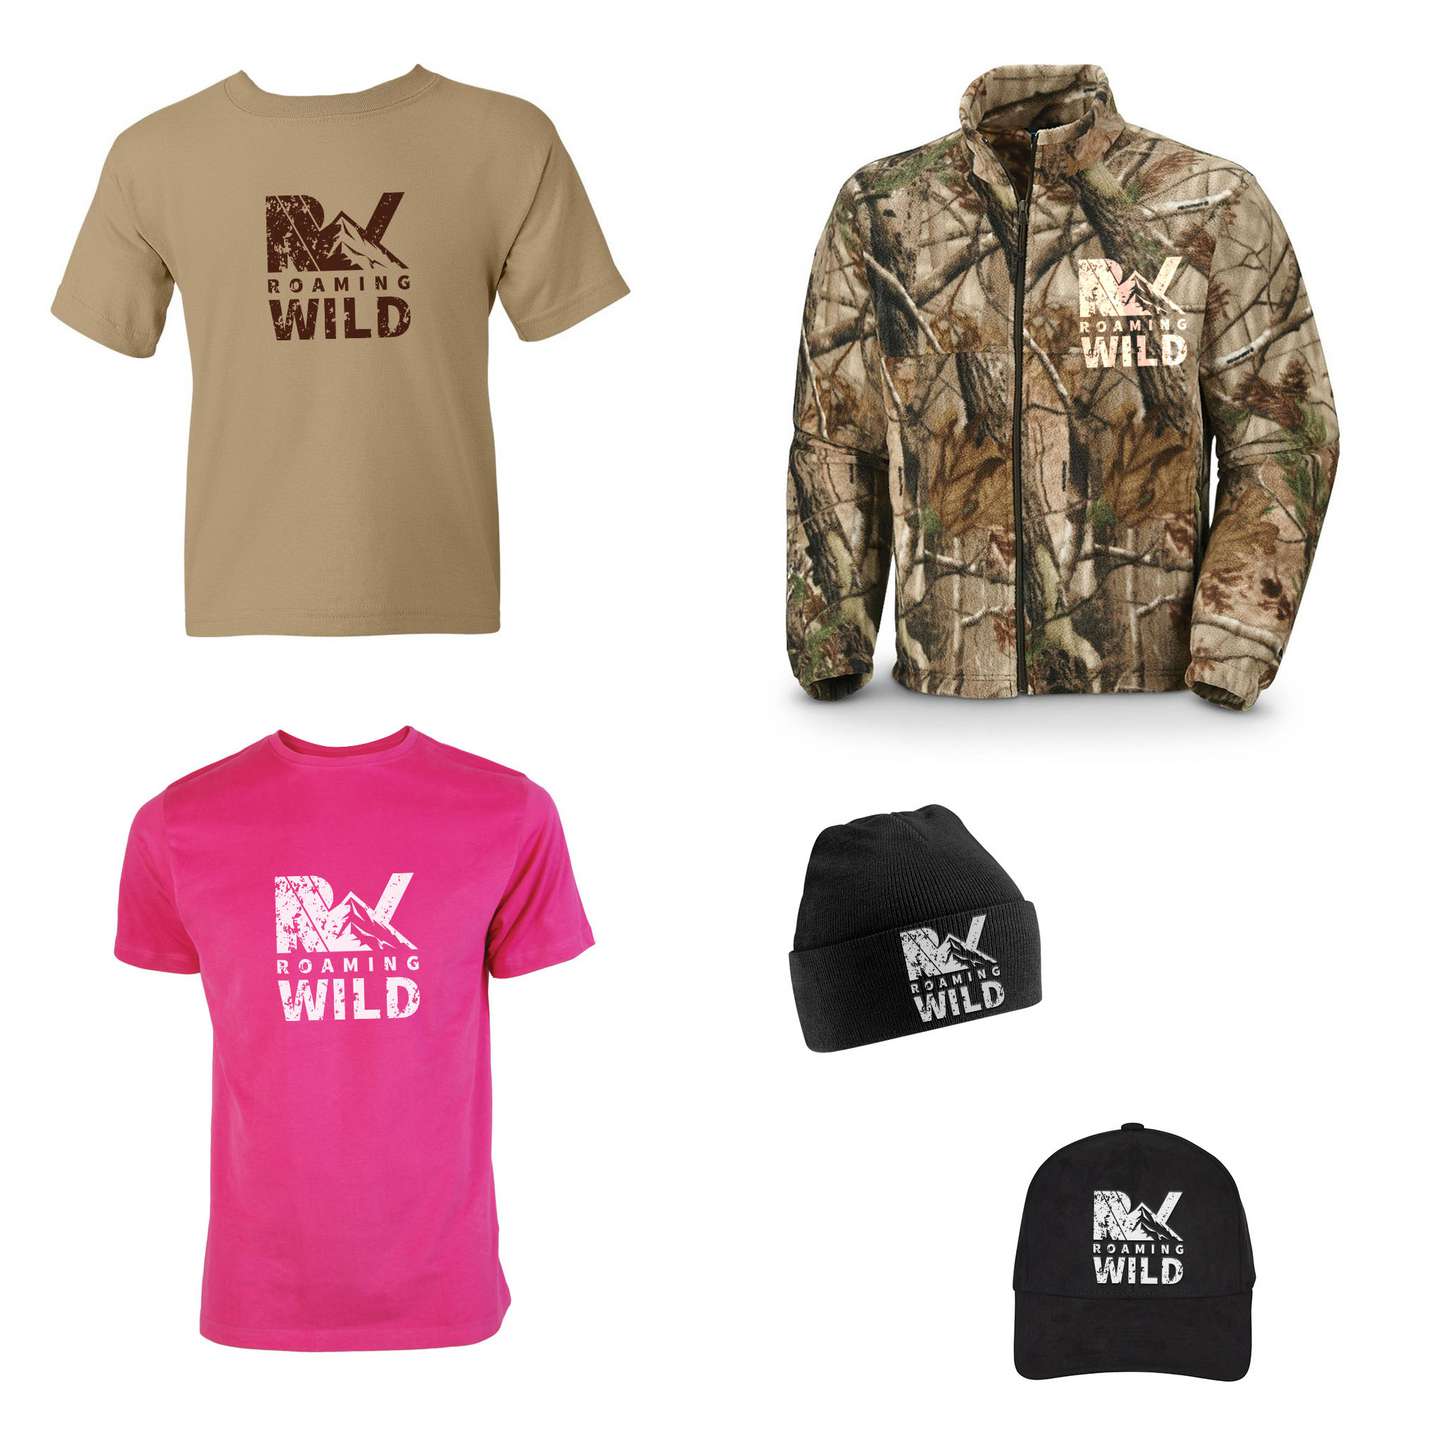 Roaming Wild logo on several products including shirts, jackets, and hats]